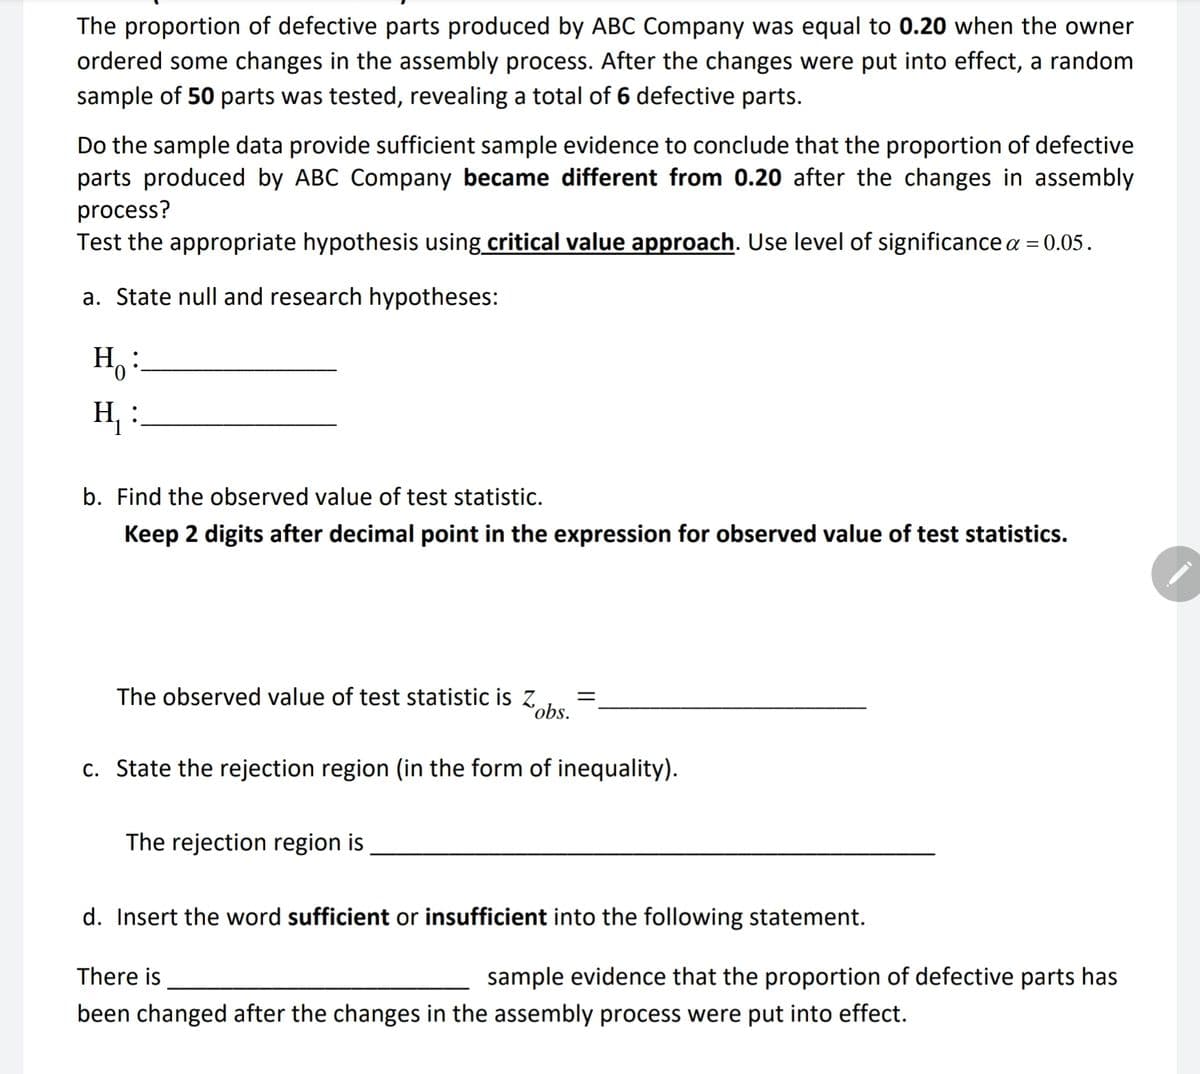 The proportion of defective parts produced by ABC Company was equal to 0.20 when the owner
ordered some changes in the assembly process. After the changes were put into effect, a random
sample of 50 parts was tested, revealing a total of 6 defective parts.
Do the sample data provide sufficient sample evidence to conclude that the proportion of defective
parts produced by ABC Company became different from 0.20 after the changes in assembly
process?
Test the appropriate hypothesis using critical value approach. Use level of significance a = 0.05.
a. State null and research hypotheses:
Ho:
H₁ :
b. Find the observed value of test statistic.
Keep 2 digits after decimal point in the expression for observed value of test statistics.
The observed value of test statistic is Z =
obs.
c. State the rejection region (in the form of inequality).
The rejection region is
d. Insert the word sufficient or insufficient into the following statement.
There is
sample evidence that the proportion of defective parts has
been changed after the changes in the assembly process were put into effect.
-